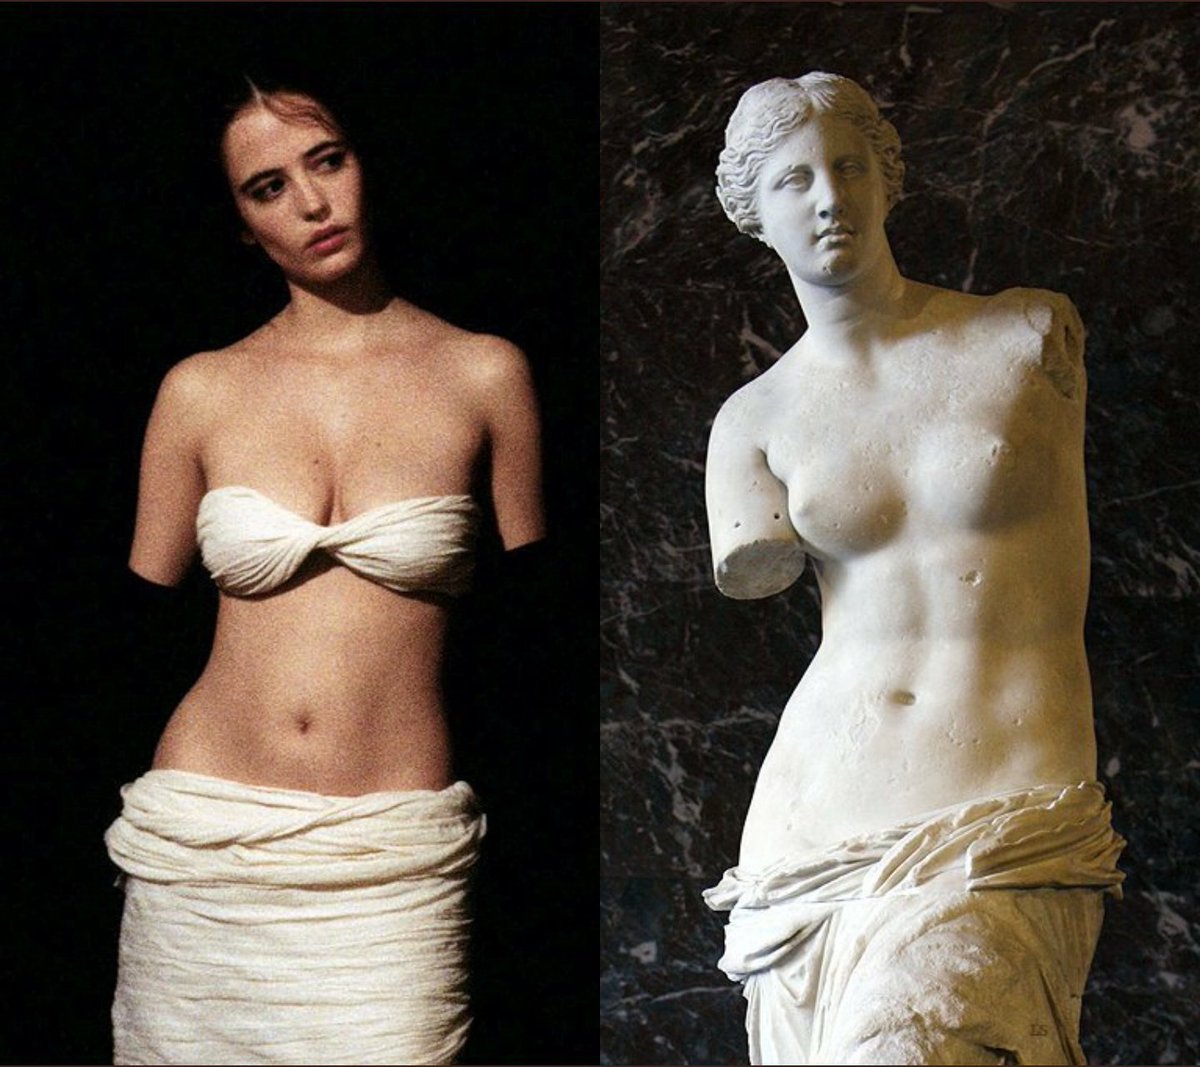 5. The Dreamers (Bernardo Bertolucci) - Venus de Milo (attributed to Alexandros of Antioch, 2nd century BC)

Eva Green—wearing black arm length gloves—stands in the dark, gracefully recreating one of the most iconic sculptures of all time.